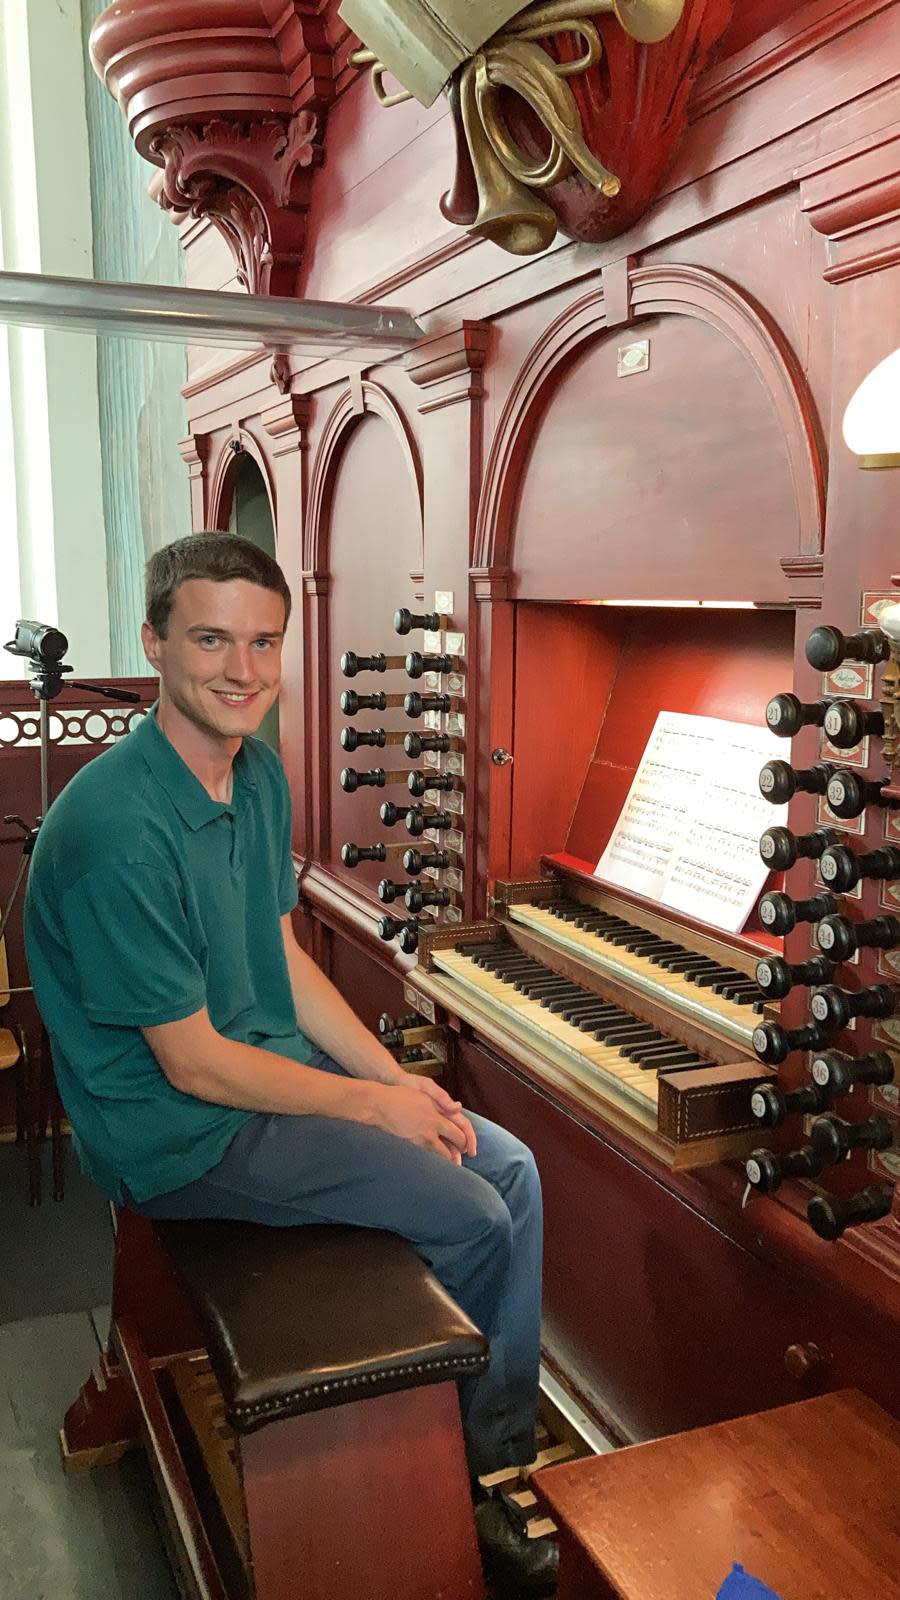 Michael Kearney, a Monaca resident, has played organ concerts both sides of The Atlantic.